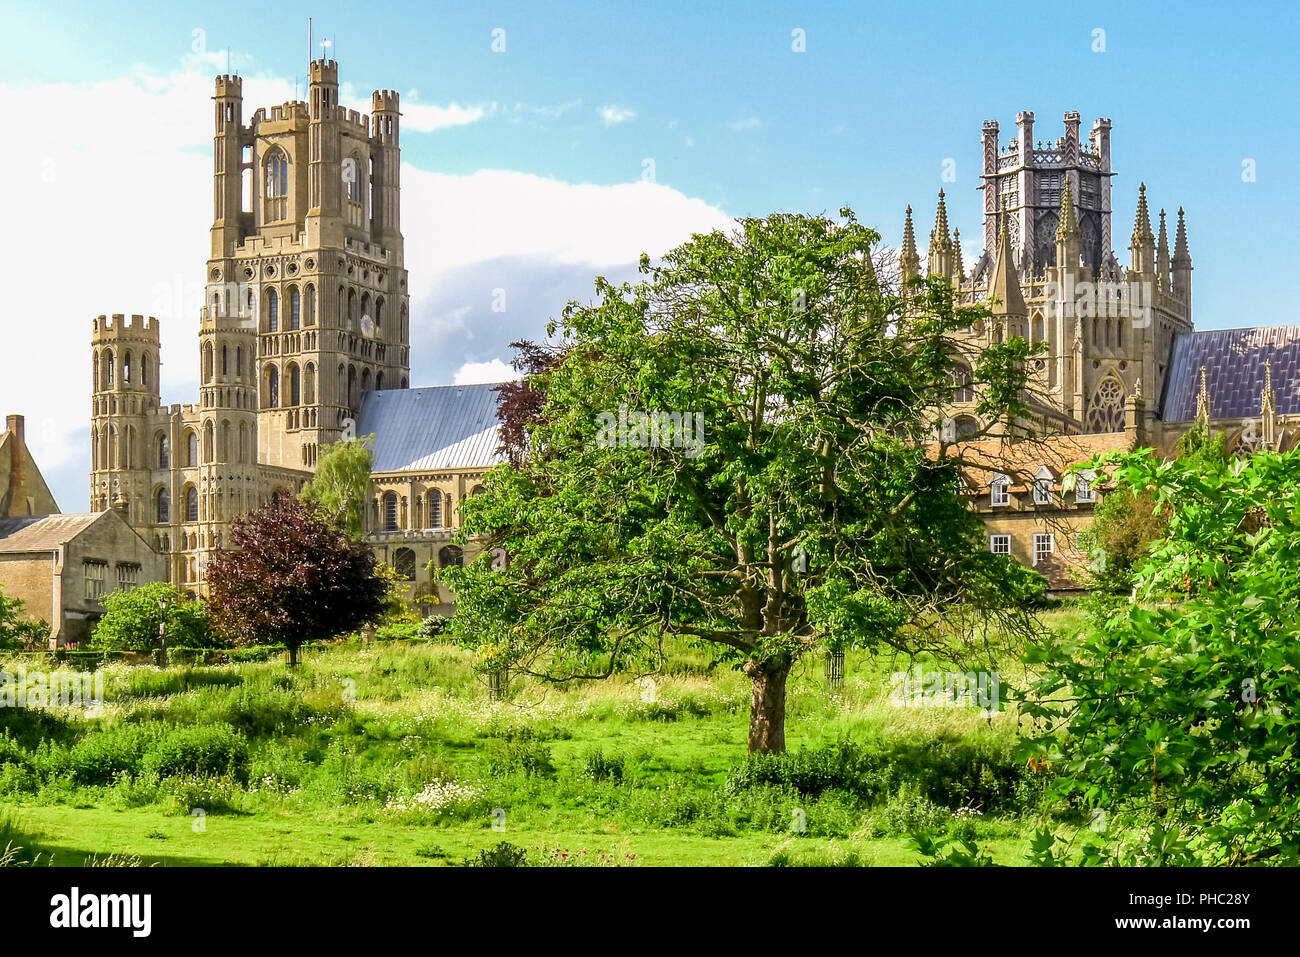 View of historical Ely Cathedral from Cherry Hill Park in summer, Ely, Cambridgeshire, England Stock Photo